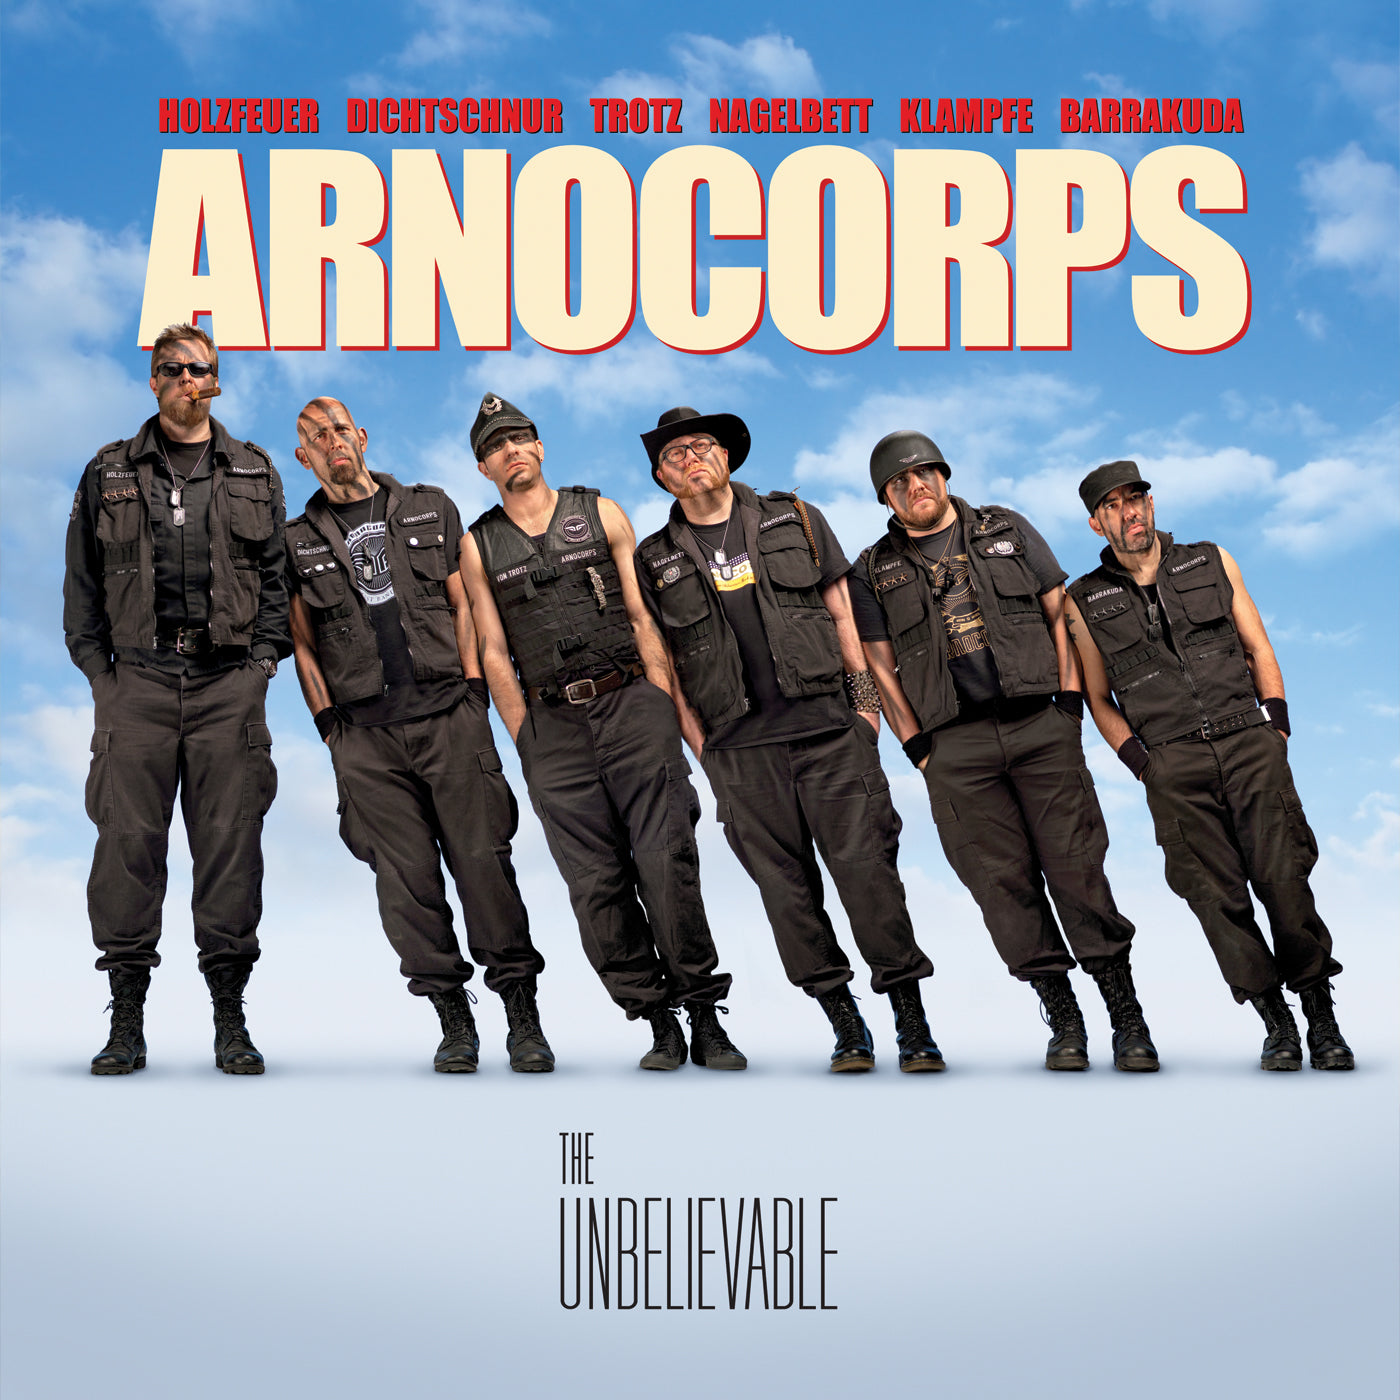 v491 - Arnocorps - "The Unbelievable"